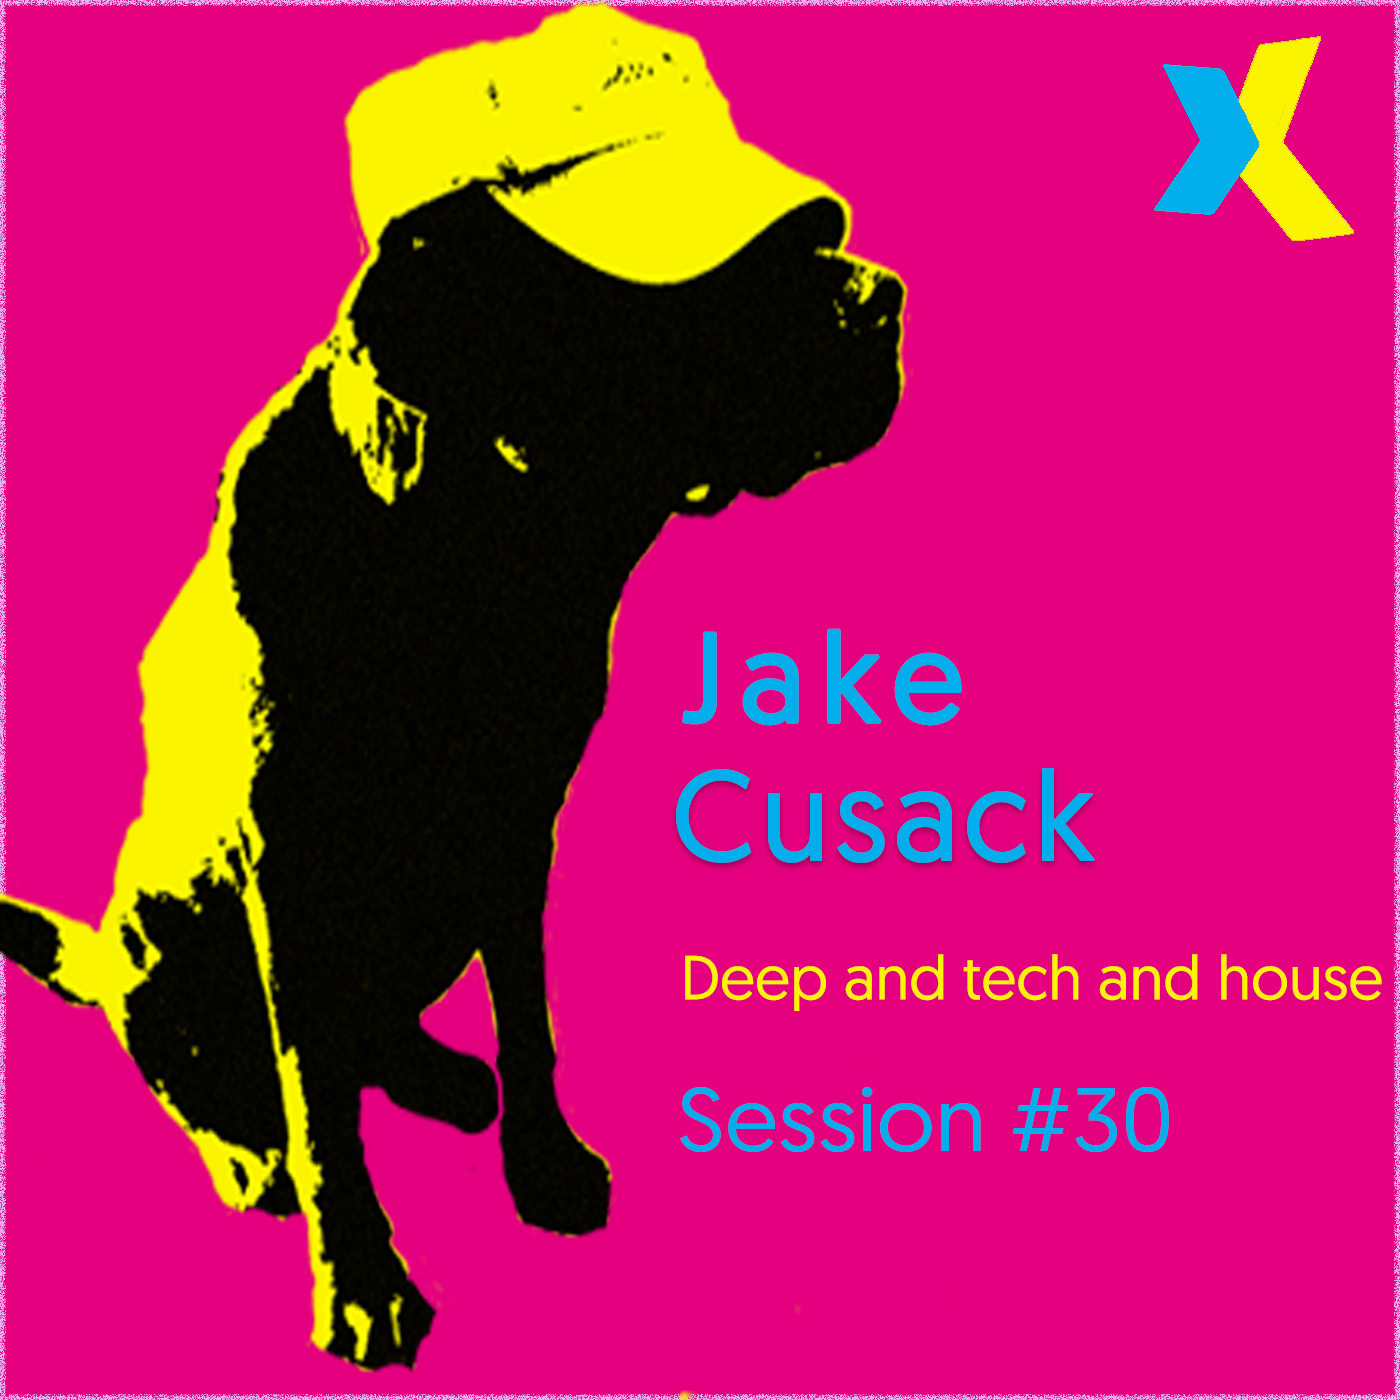 Jake Cusack - Deep and tech and house - October - Session 30